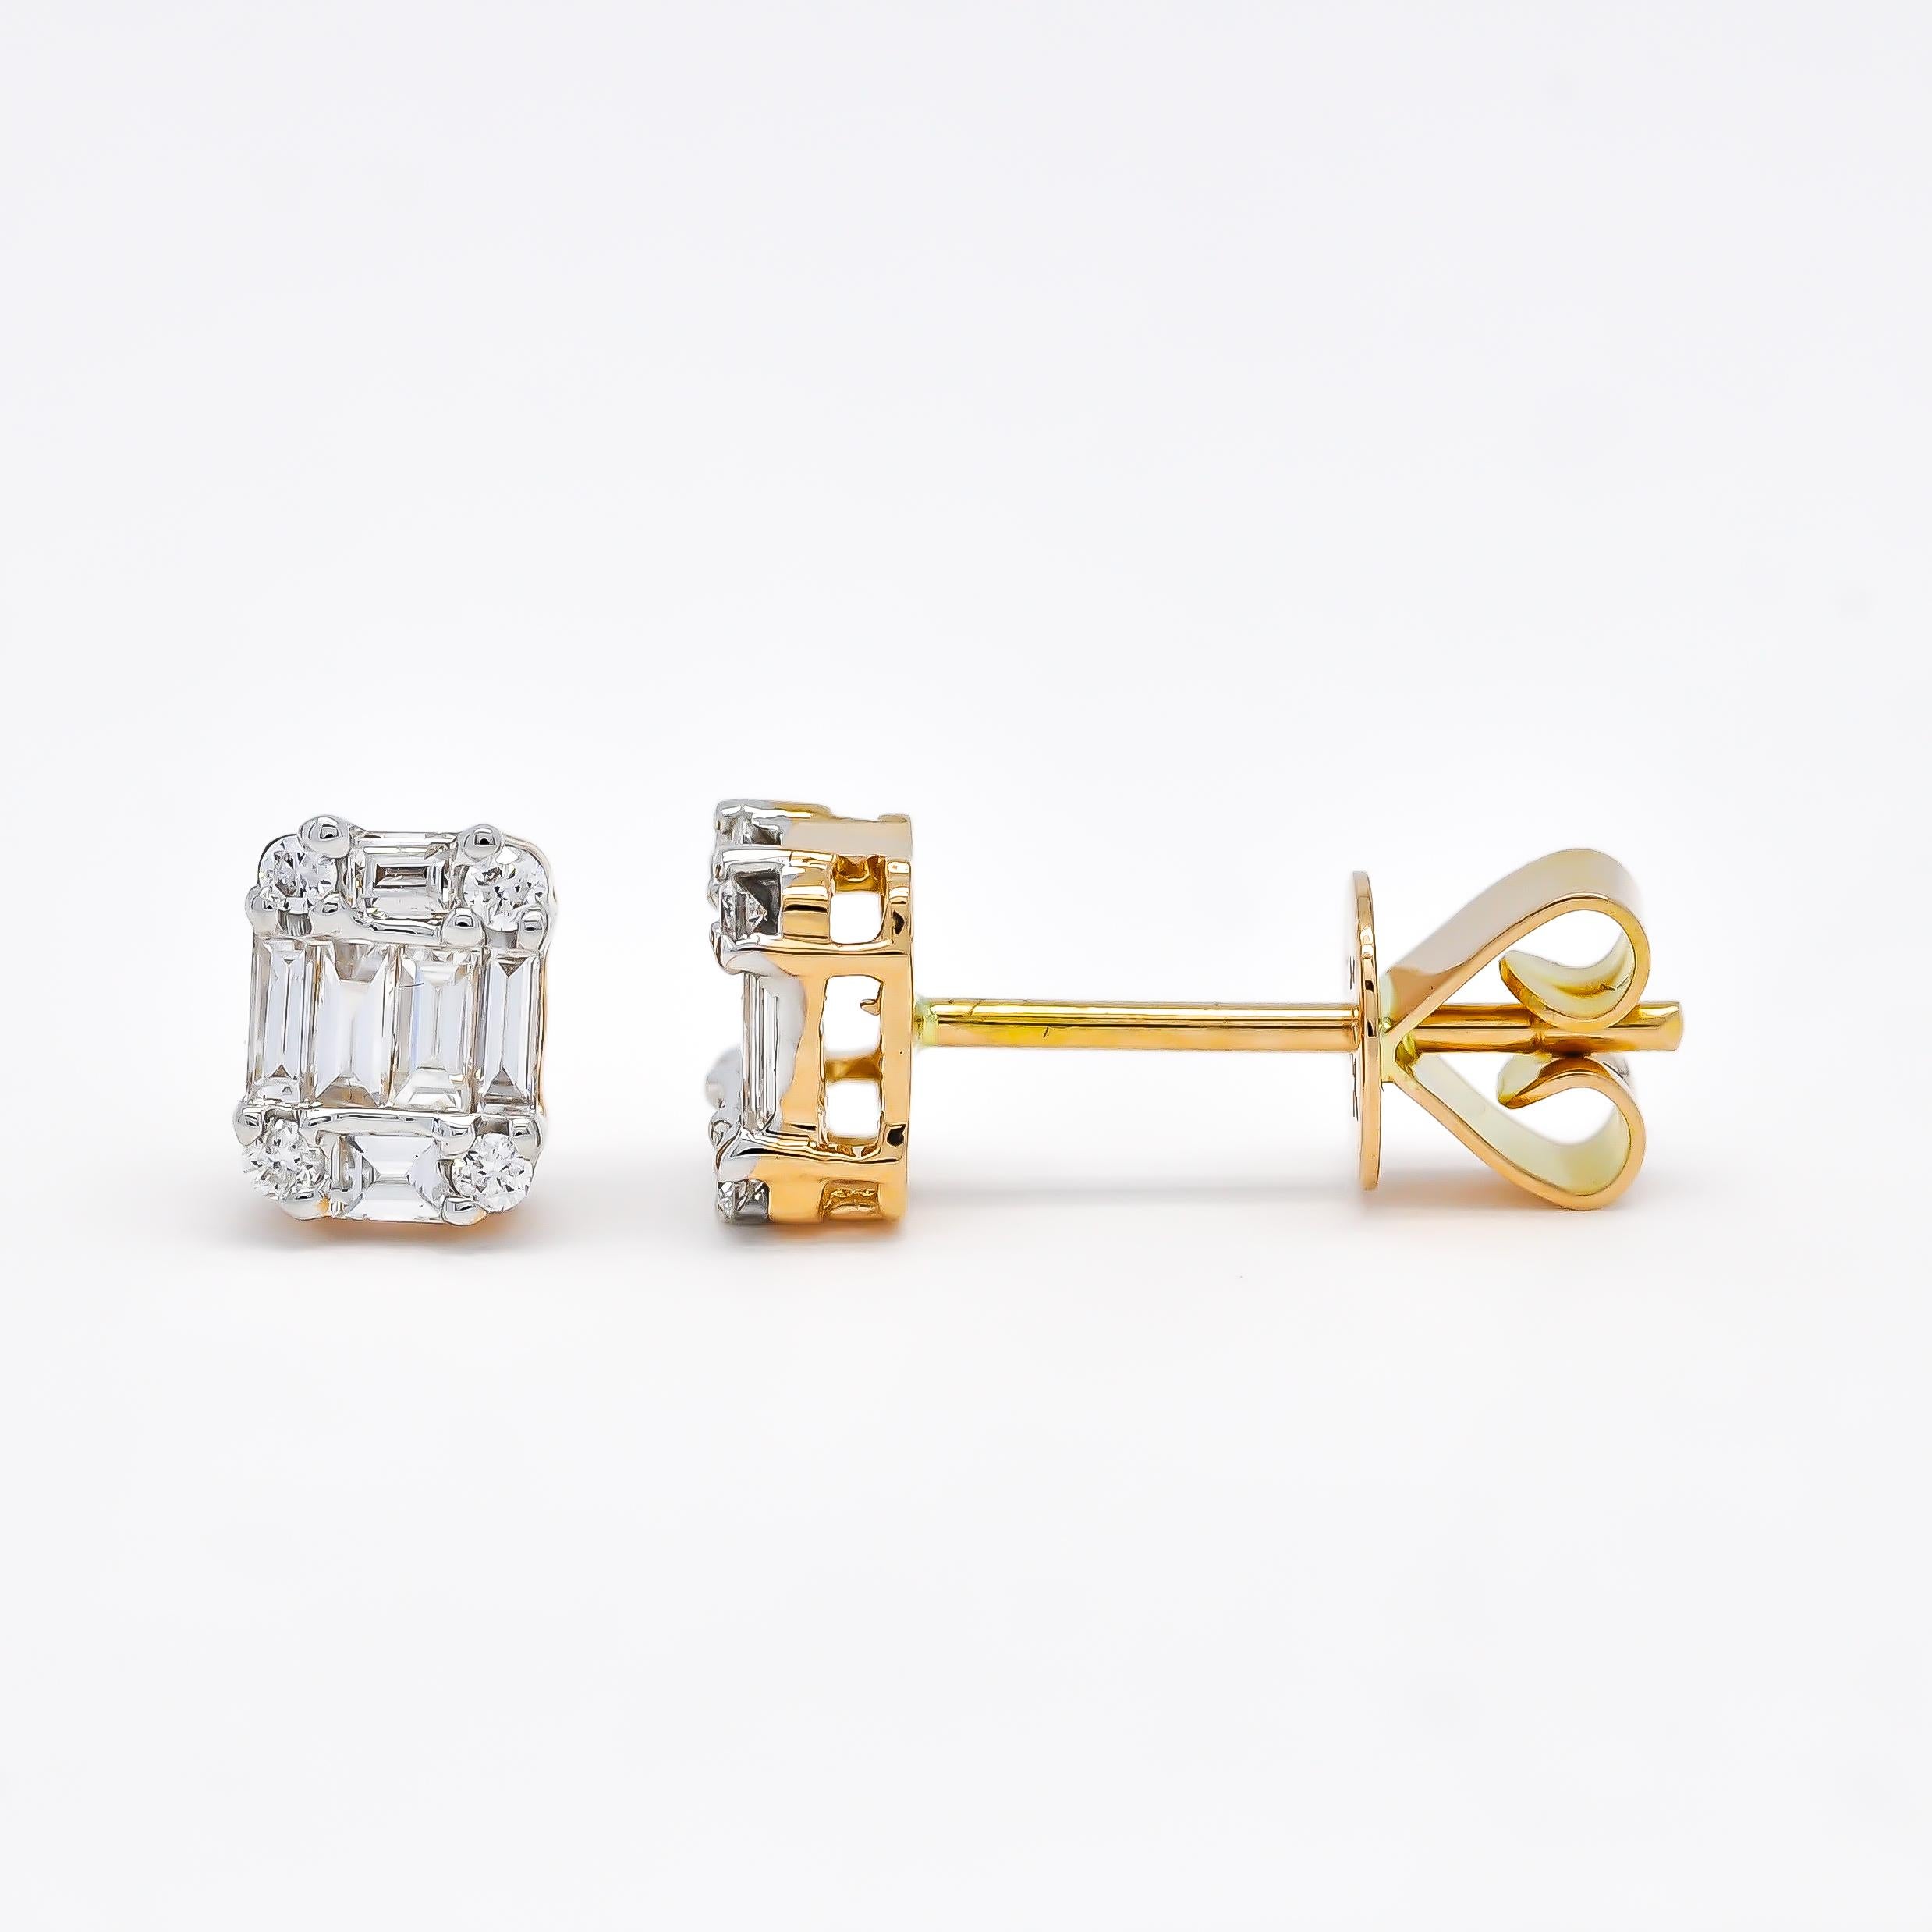 These earrings feature a square design with a cluster of baguette and round-cut natural diamonds set in 18KT white gold. The diamonds are carefully selected for their quality, ensuring a brilliant sparkle and exquisite shine that will make any woman